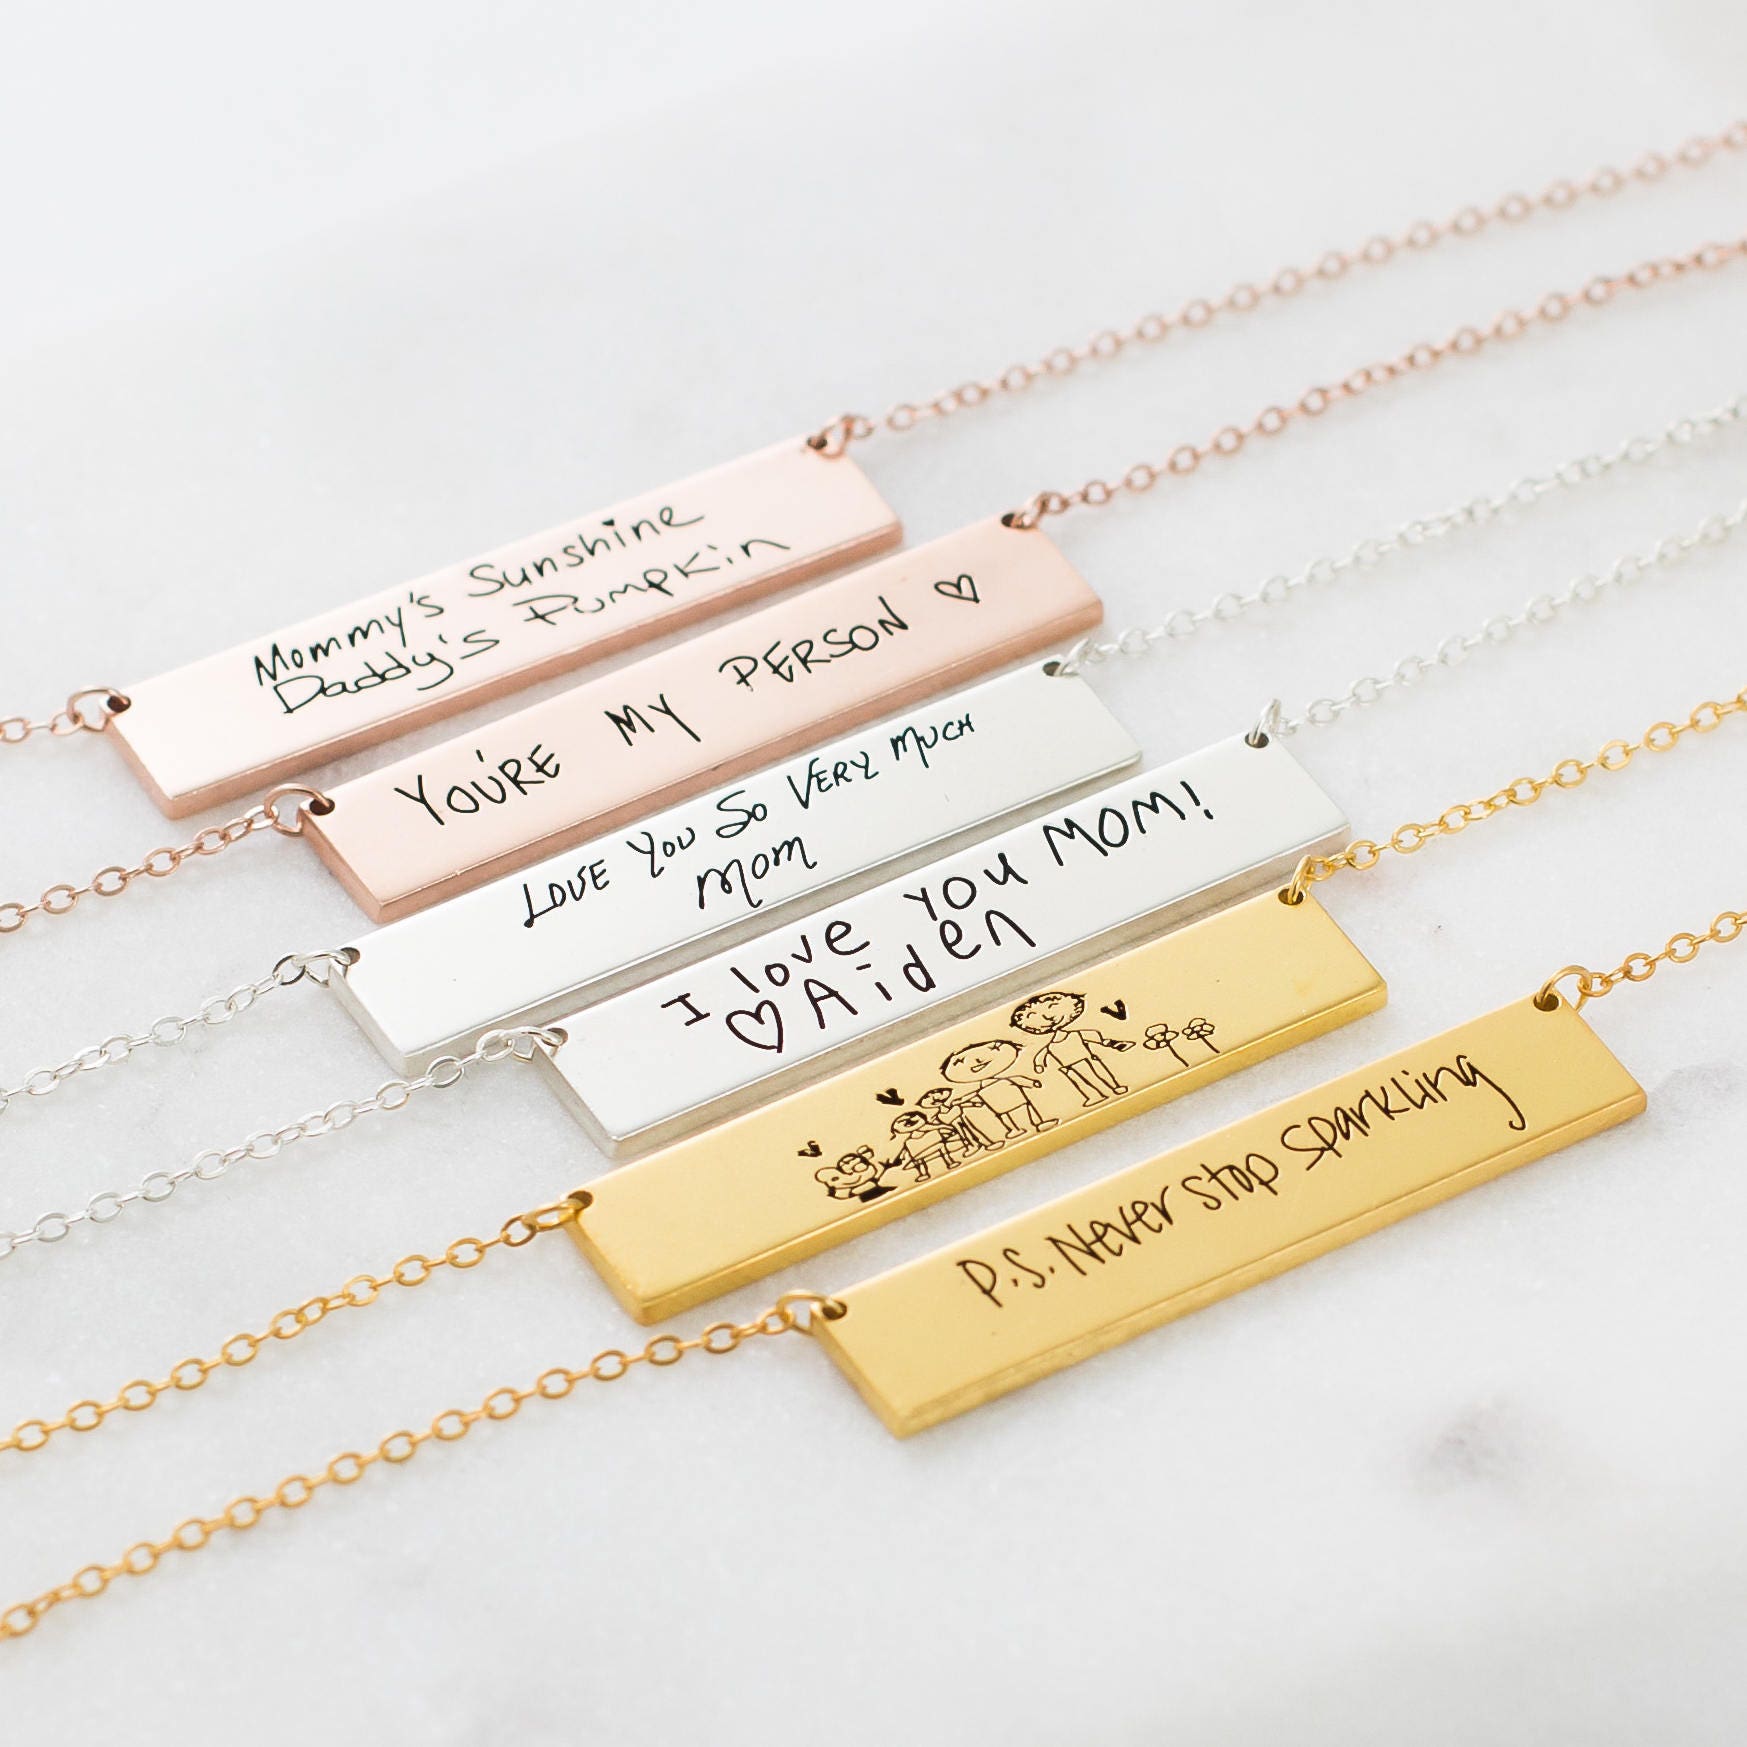 Handwriting Jewelry • Engraved Actual Handwriting Necklace• Personalized Gift for Her